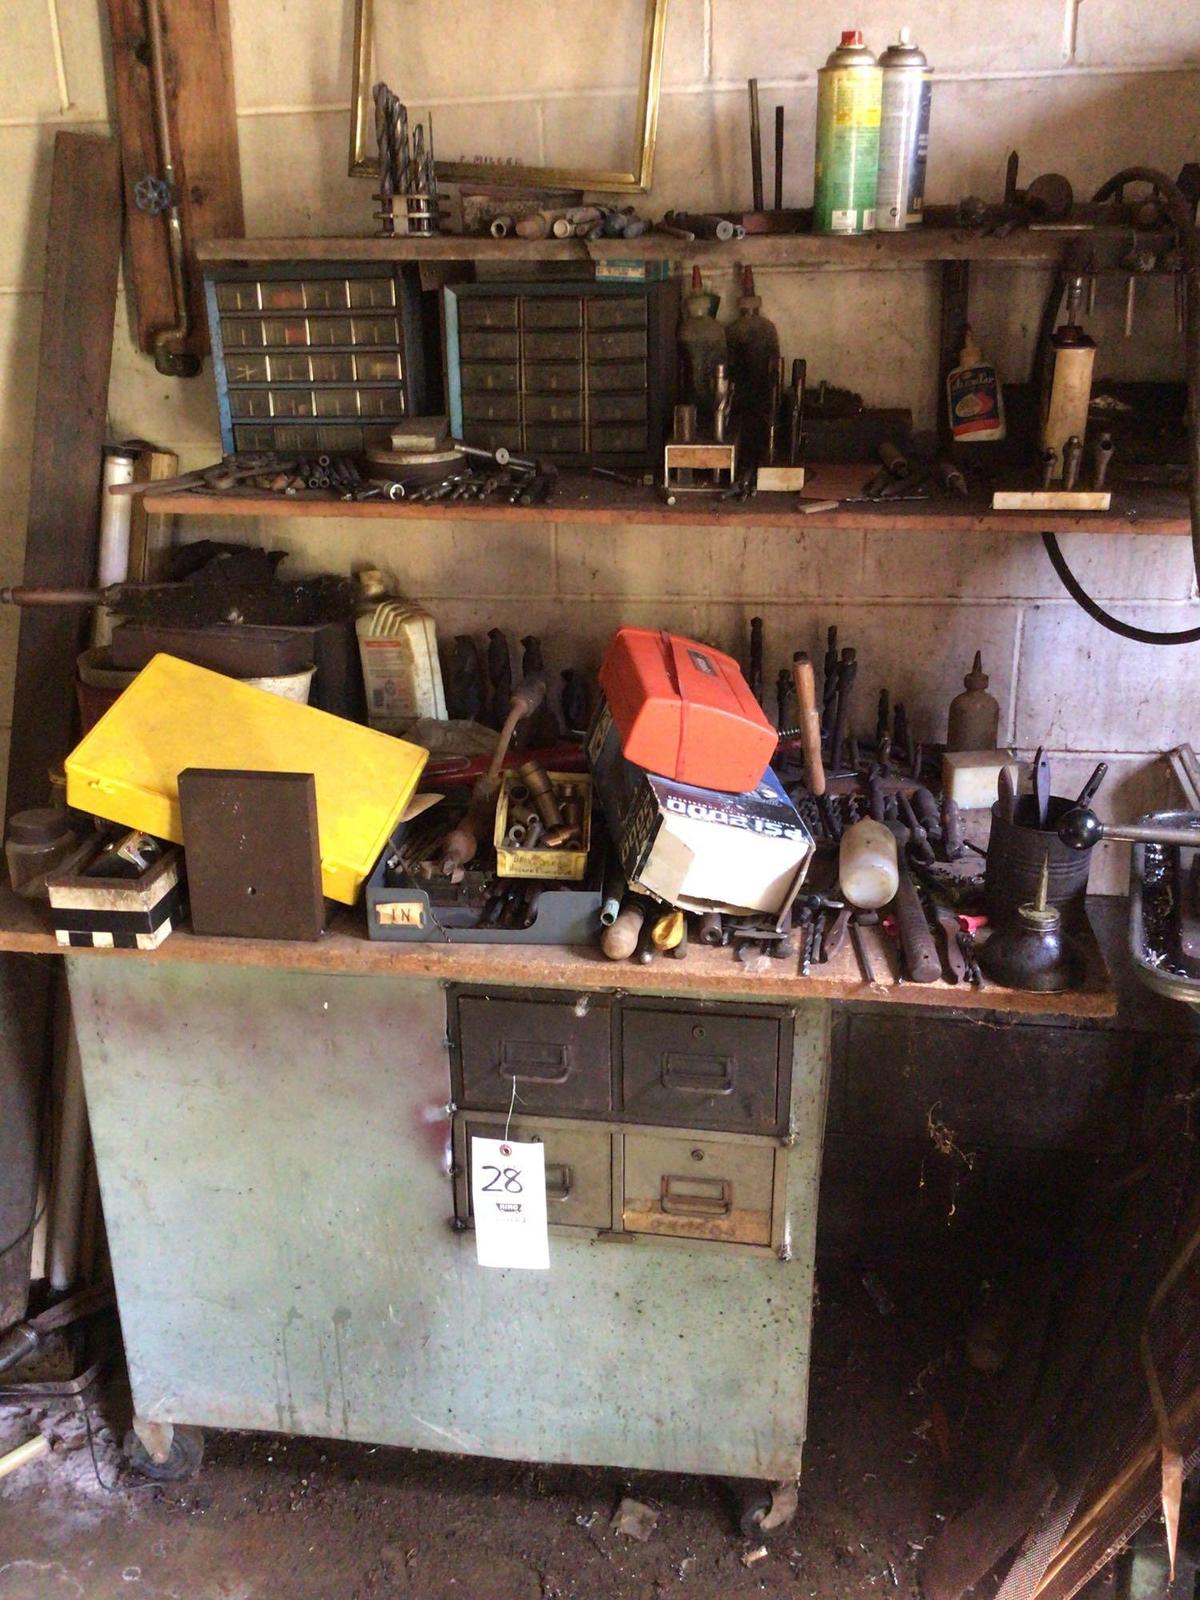 Drill bits and small stand